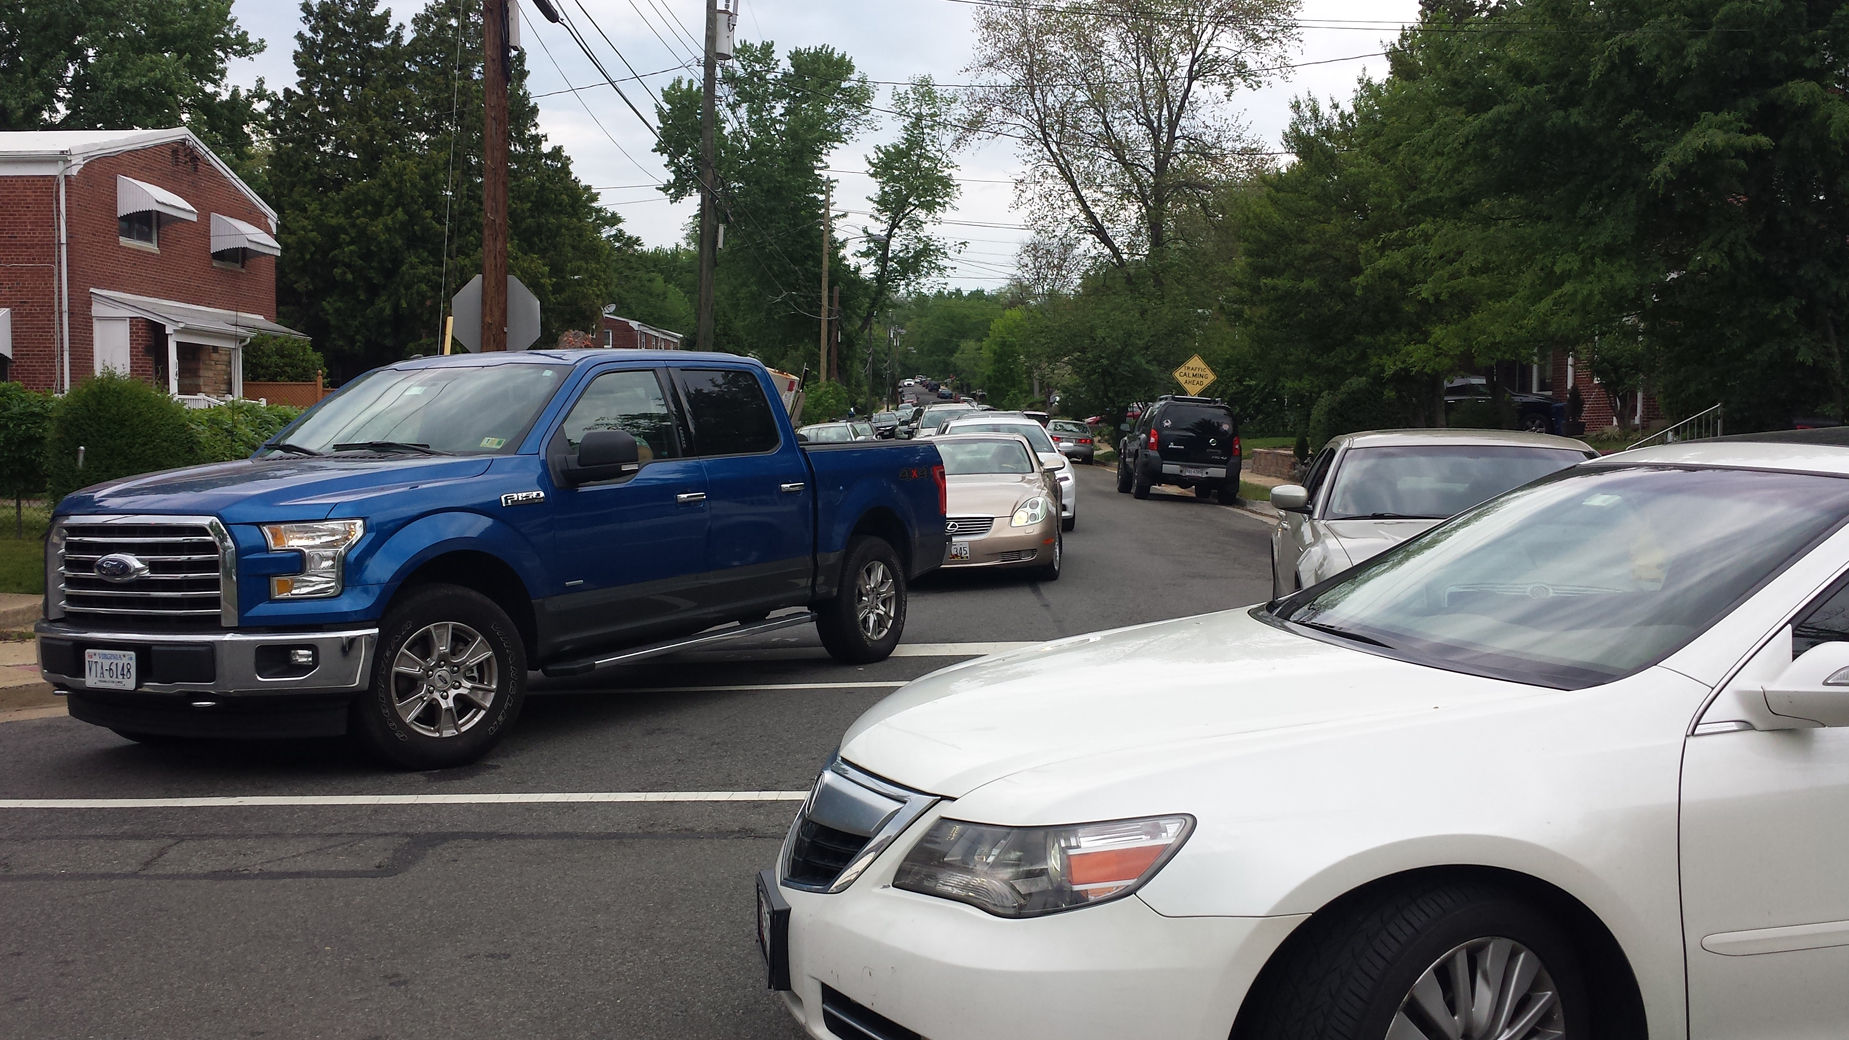 Traffic backed up on East Taylor Run Parkway in Alexandria